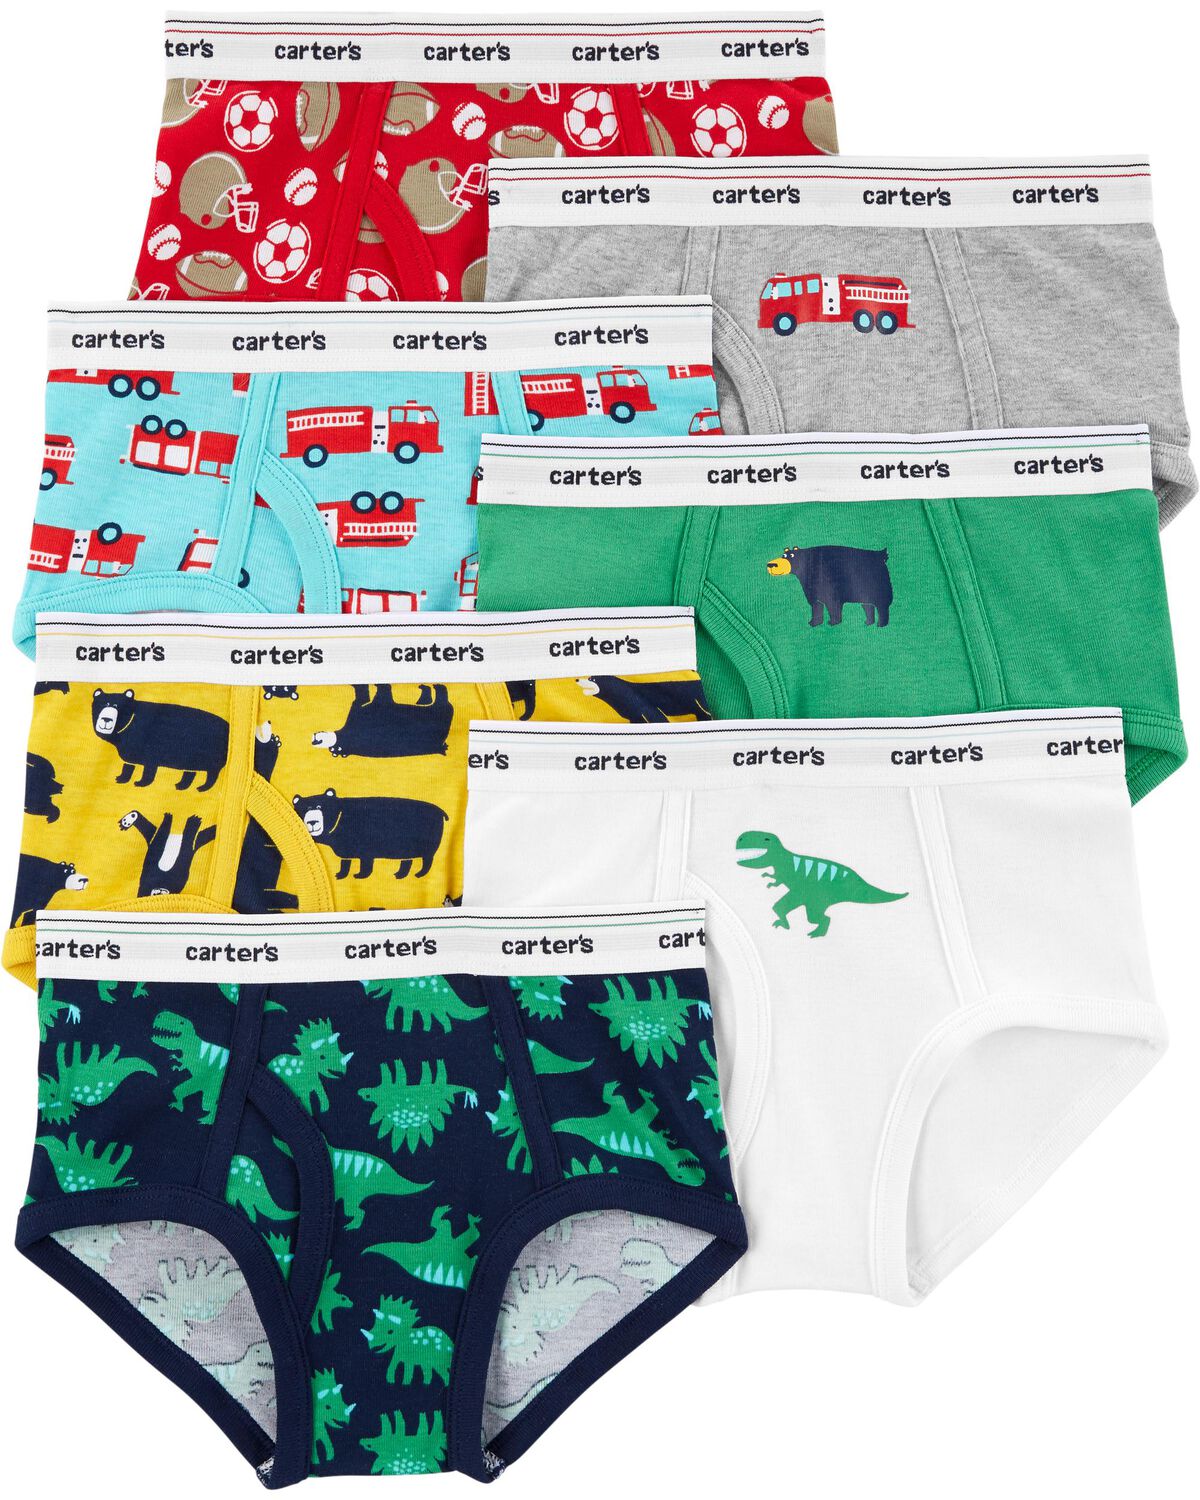 Boys' Toddler 7-Pack 100% Combed Cotton Brief Underwear Sizes 2/3t and 4t